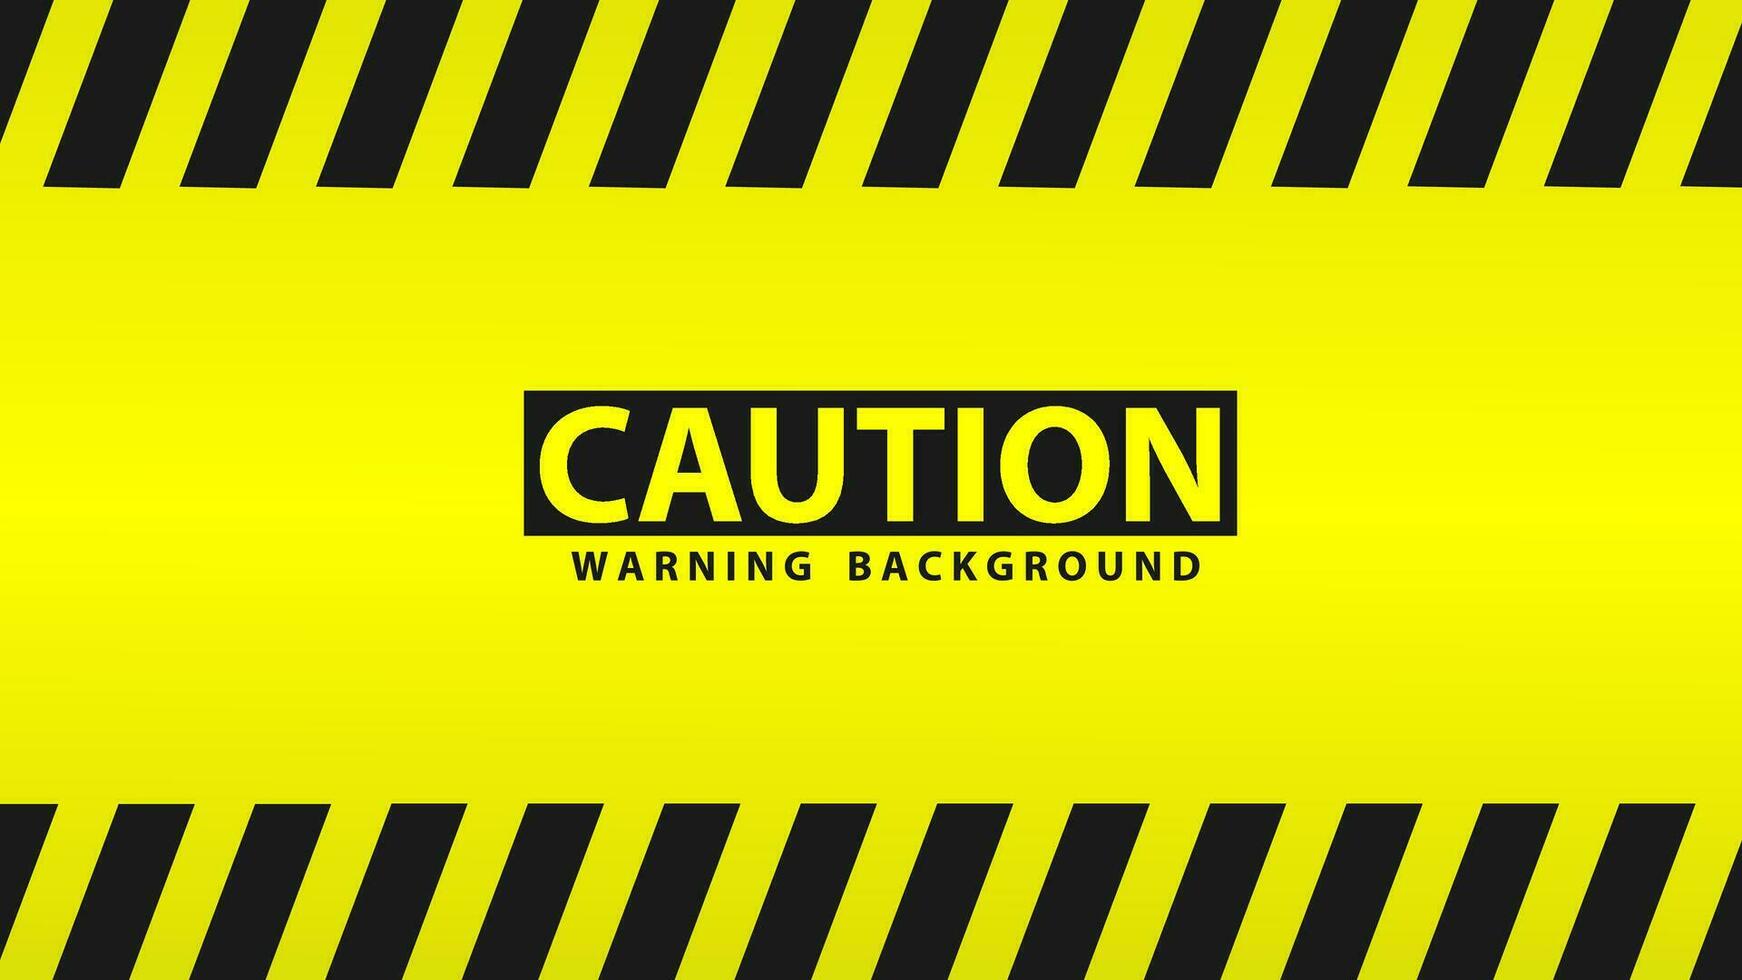 Striped black and yellow stripes. Warning tape. Blank warning background. Vector illustration